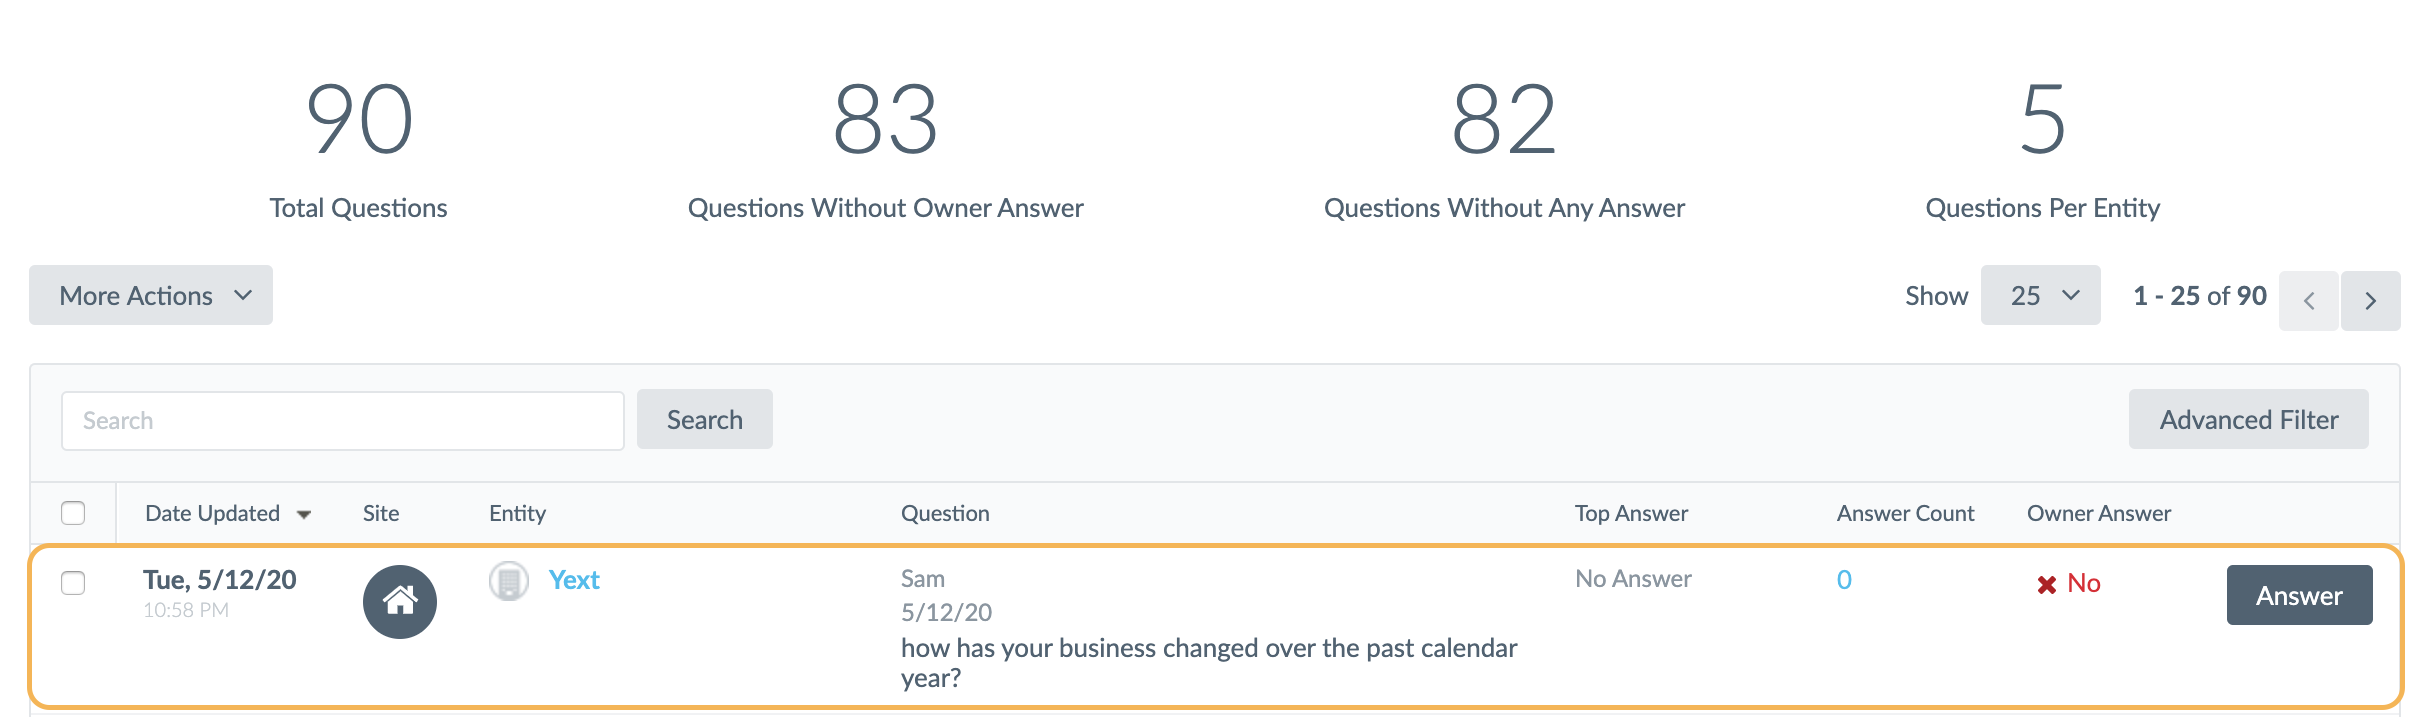 Q&A results on Reviews screen